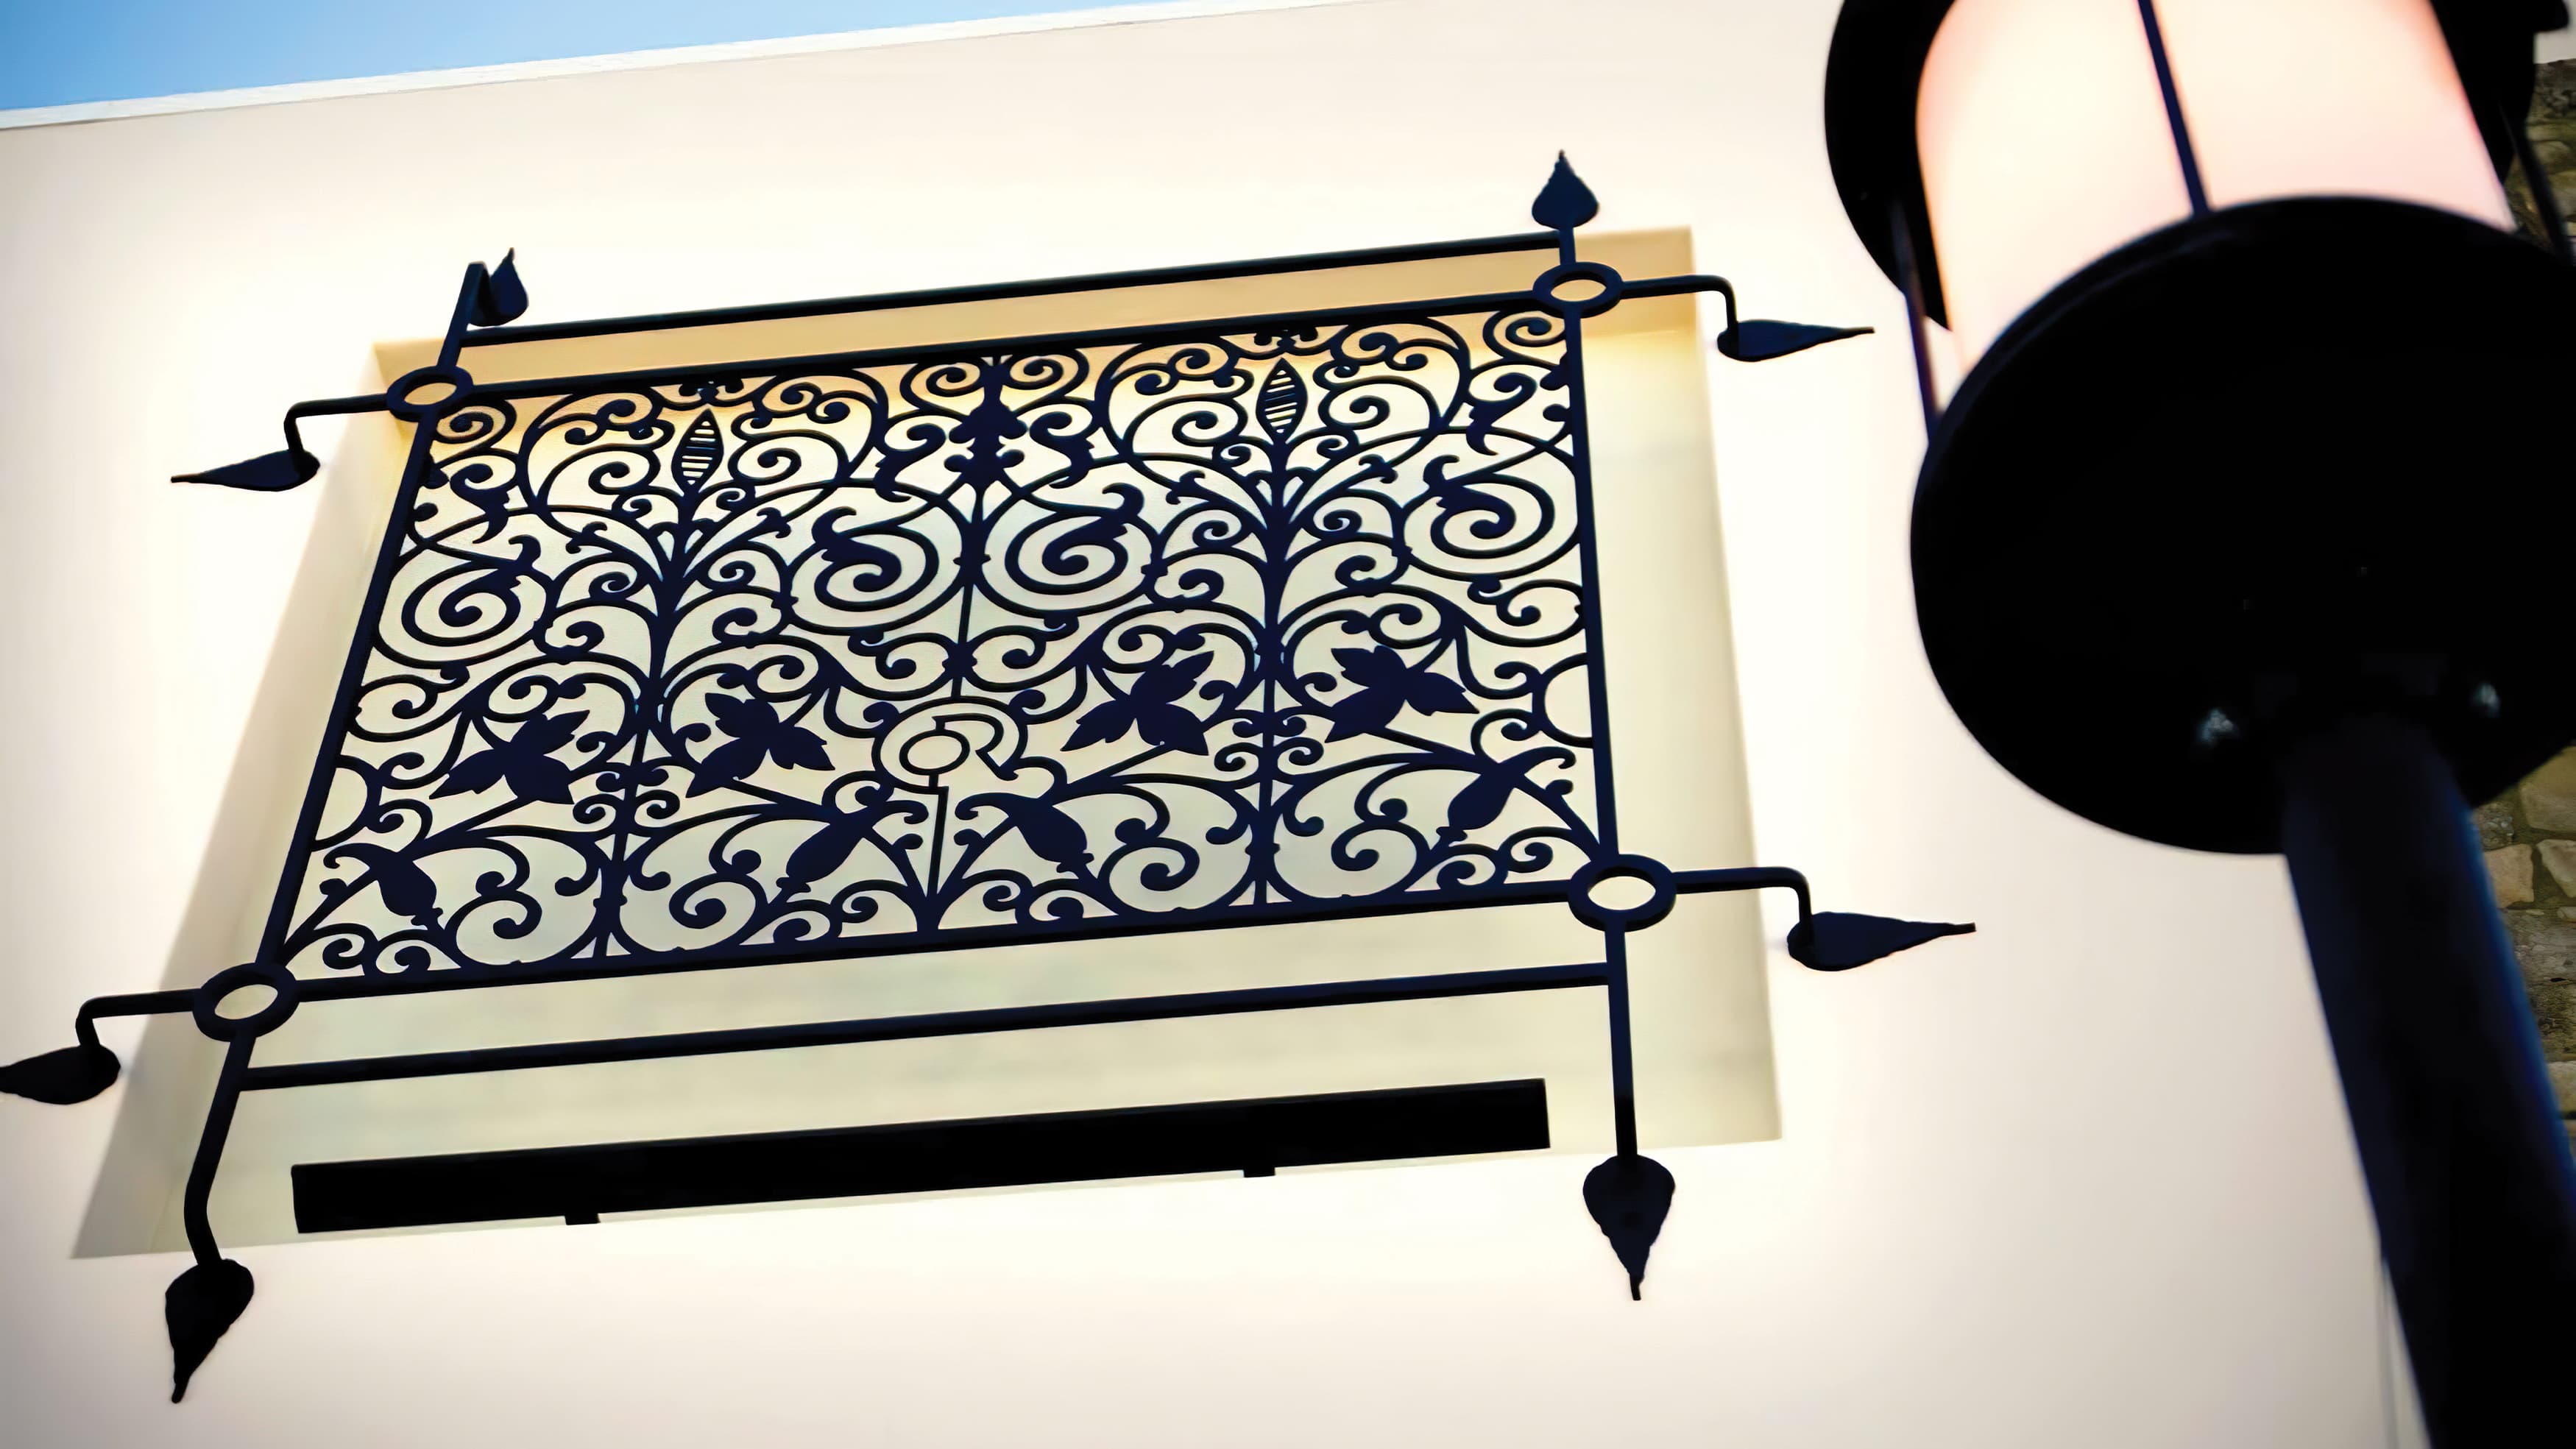 A patterned architectural grille feature, a piece of the public art program by RSM Design